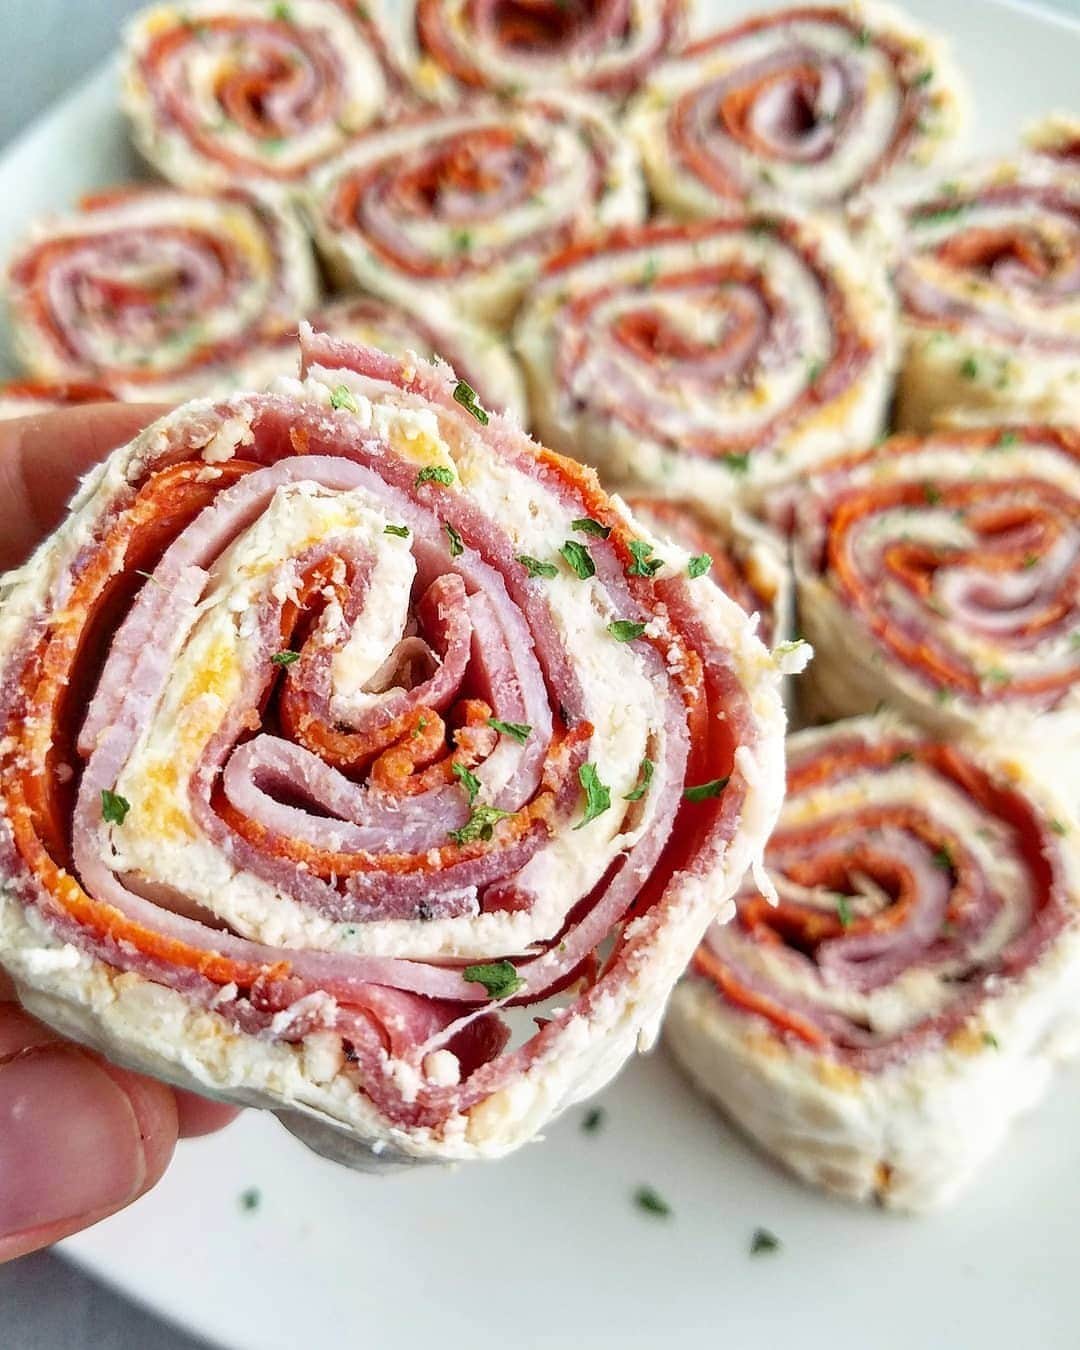 Flavorgod Seasoningsさんのインスタグラム写真 - (Flavorgod SeasoningsInstagram)「🍃 Italian Roll-ups with Flavor God Italian Zest Seasoning which is only $2 today!!⁠ -⁠ Click the link in my bio @flavorgod⁠ ✅www.flavorgod.com⁠ -⁠ Customer:👉 @lowkarbkhaleesi⁠ -⁠ 1 @CutDaCarb flatbread⁠ 8 oz Philadelphia cream cheese, softened⁠ 1-2 green onions, chopped⁠ 1/2 cup shredded colby jack⁠ 1 tsp Flavor God italian zest⁠ black pepper⁠ salami⁠ pepperoni⁠ ham⁠ ▪▪▪⁠ Using an electric mixer, beat cream cheese until smooth. Add green onion, cheese, and seasonings. Spread mixture on flatbread. Top with a layer of salami, pepperoni, then ham. Roll up tightly. Cover in clear wrap and refrigerate for 1 hour. Slice into 1 inch coins and serve!⁠ -⁠ Flavor God Seasonings are:⁠ ✅ZERO CALORIES PER SERVING⁠ ✅MADE FRESH⁠ ✅MADE LOCALLY IN US⁠ ✅FREE GIFTS AT CHECKOUT⁠ ✅GLUTEN FREE⁠ ✅#PALEO & #KETO FRIENDLY⁠ -⁠ #food #foodie #flavorgod #seasonings #glutenfree #mealprep #seasonings #breakfast #lunch #dinner #yummy #delicious #foodporn」10月21日 10時01分 - flavorgod